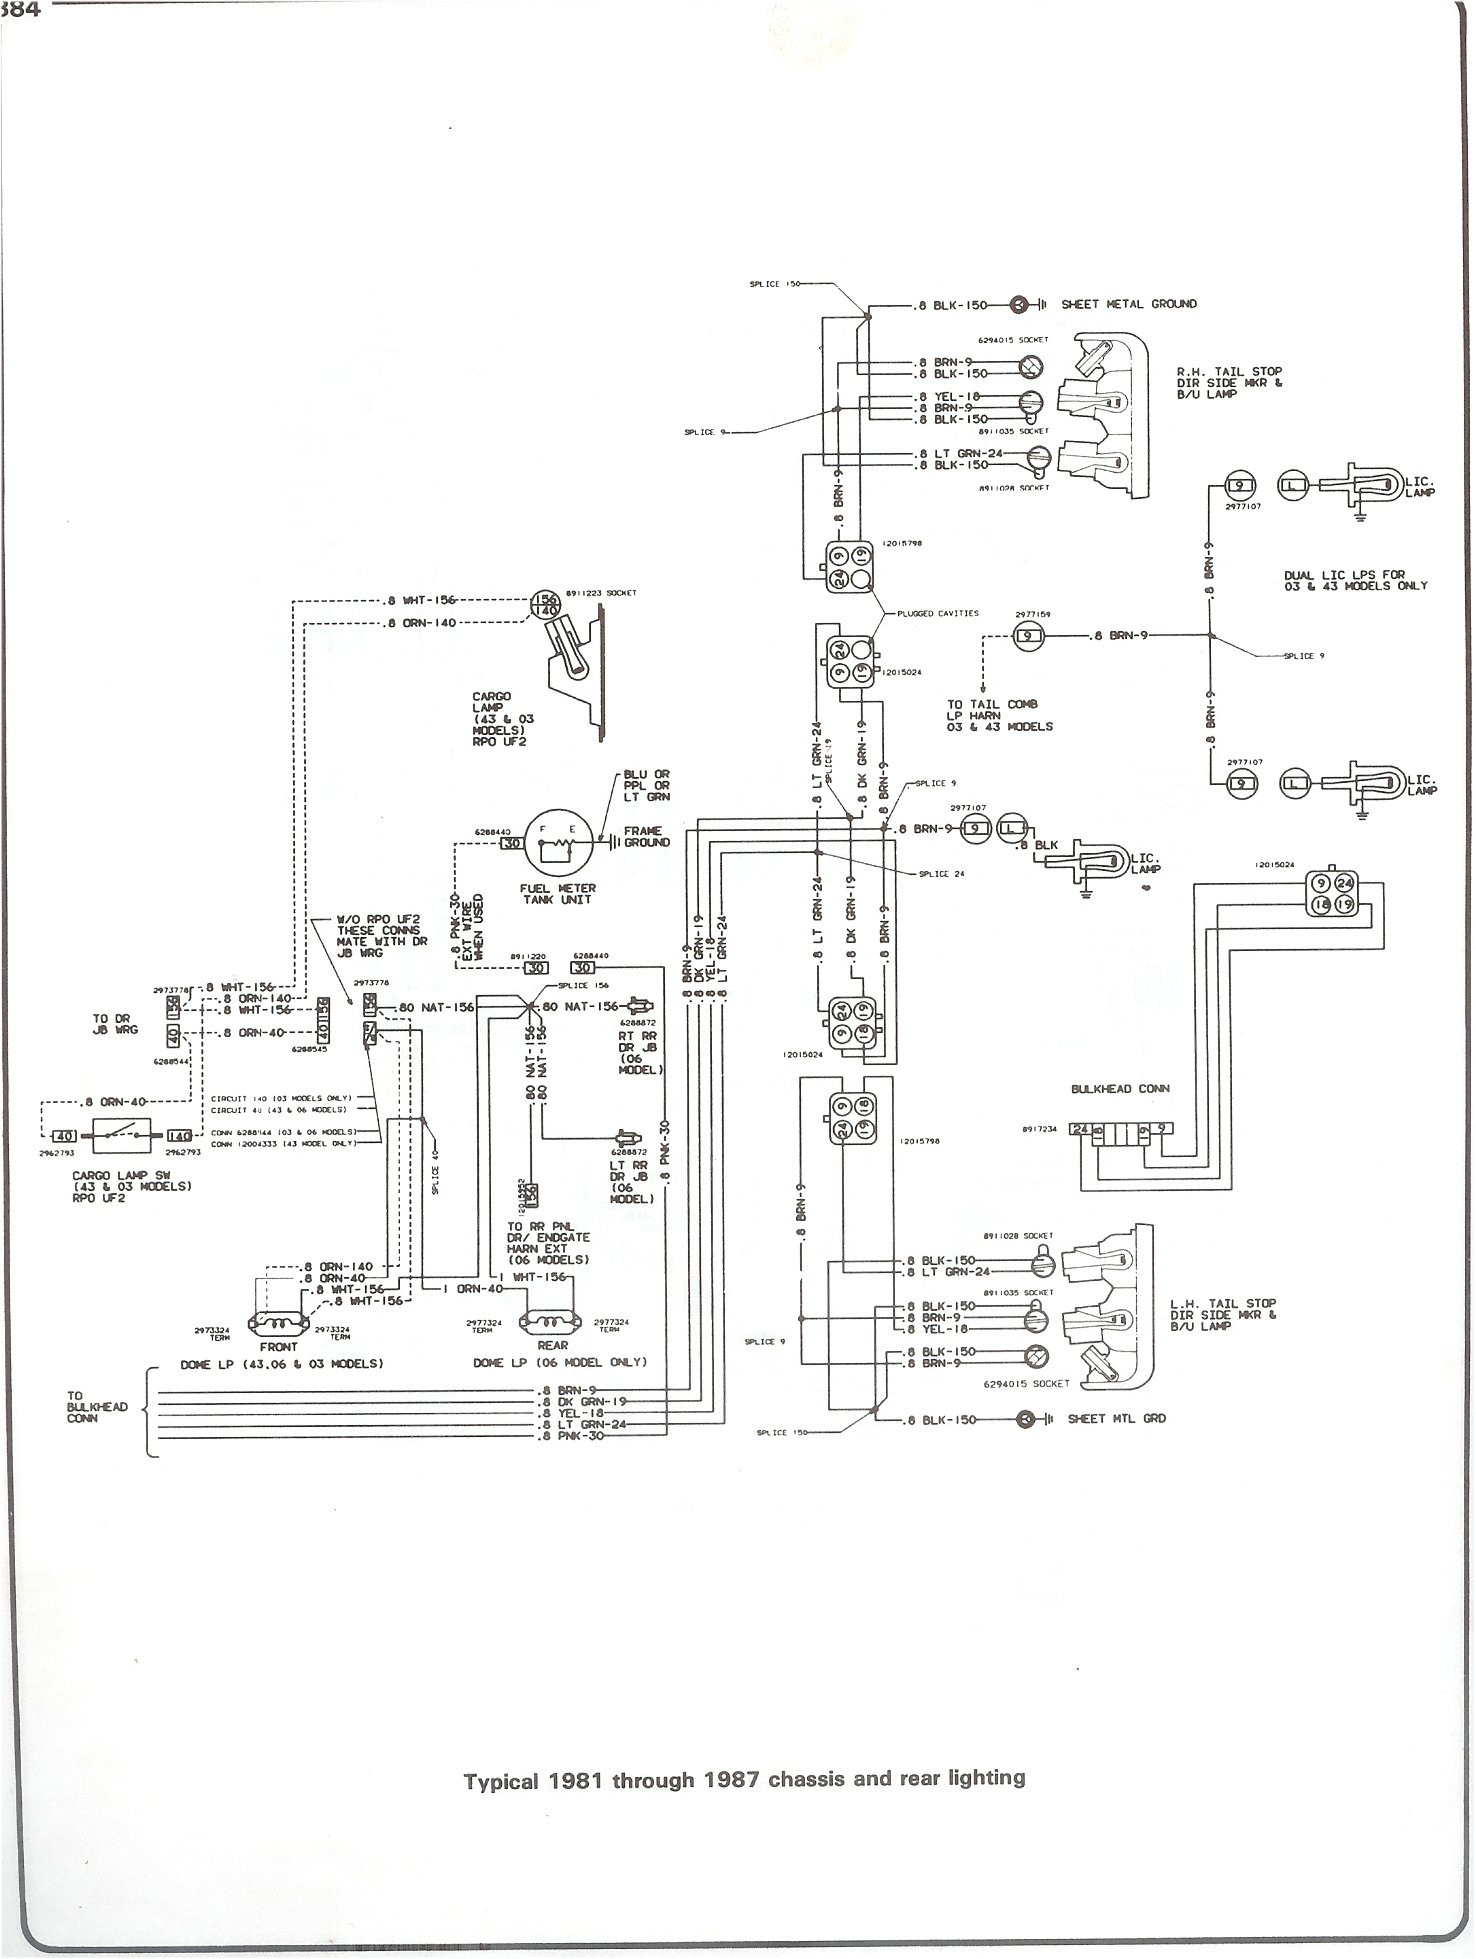 Wire Schmatic 1991 ford F150 Complete 73-87 Wiring Diagrams